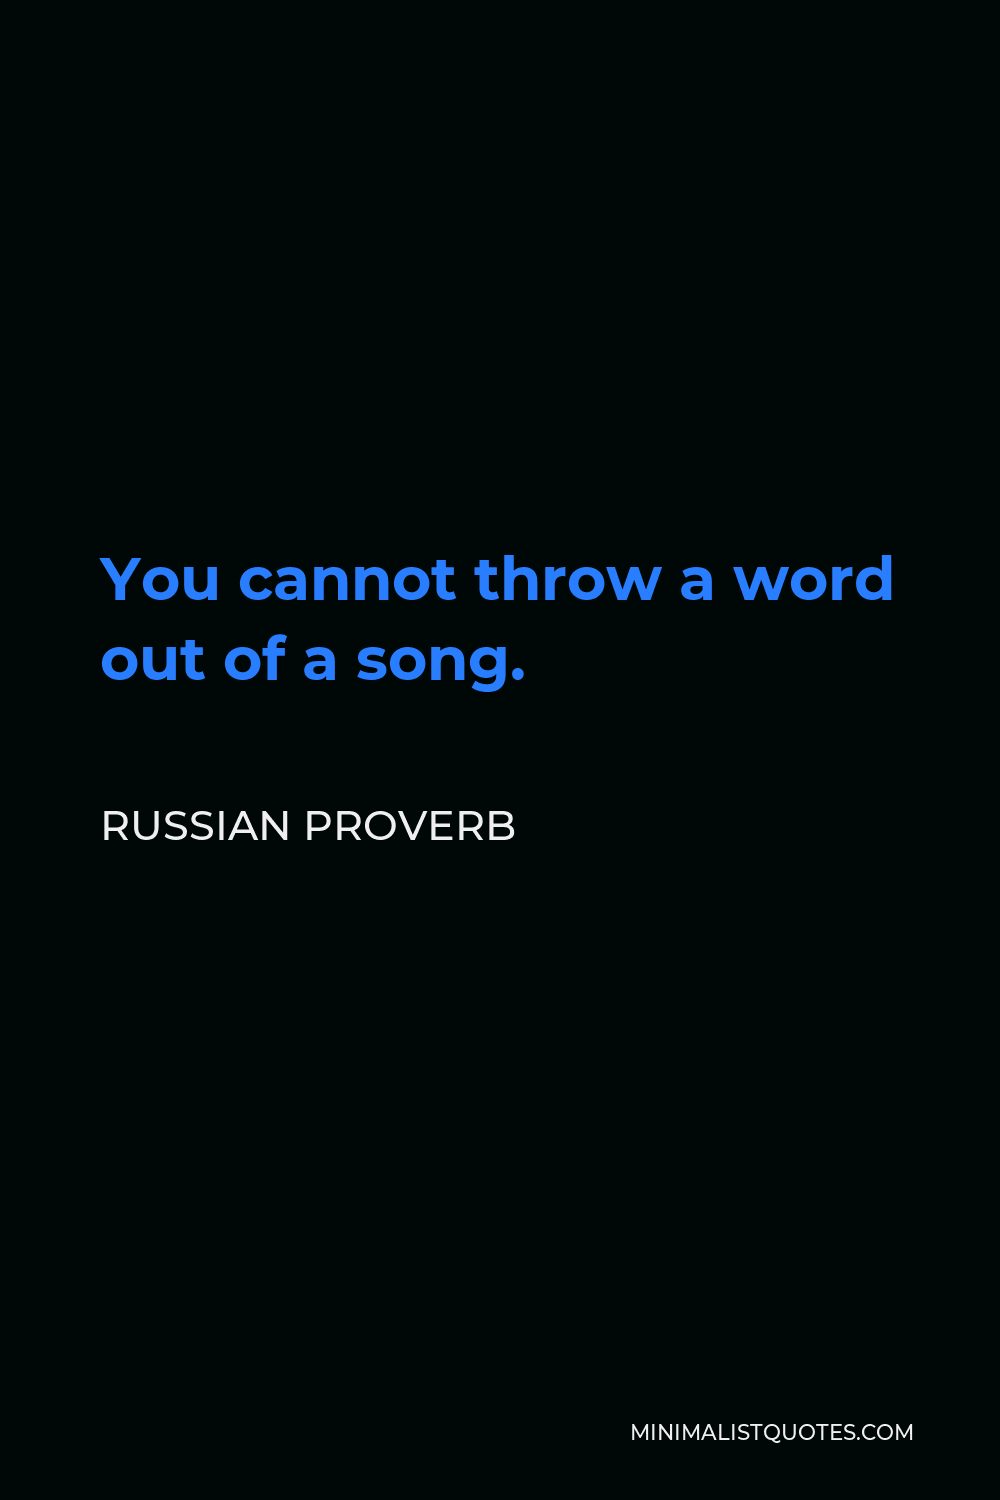 Russian Proverb Quote - You cannot throw a word out of a song.